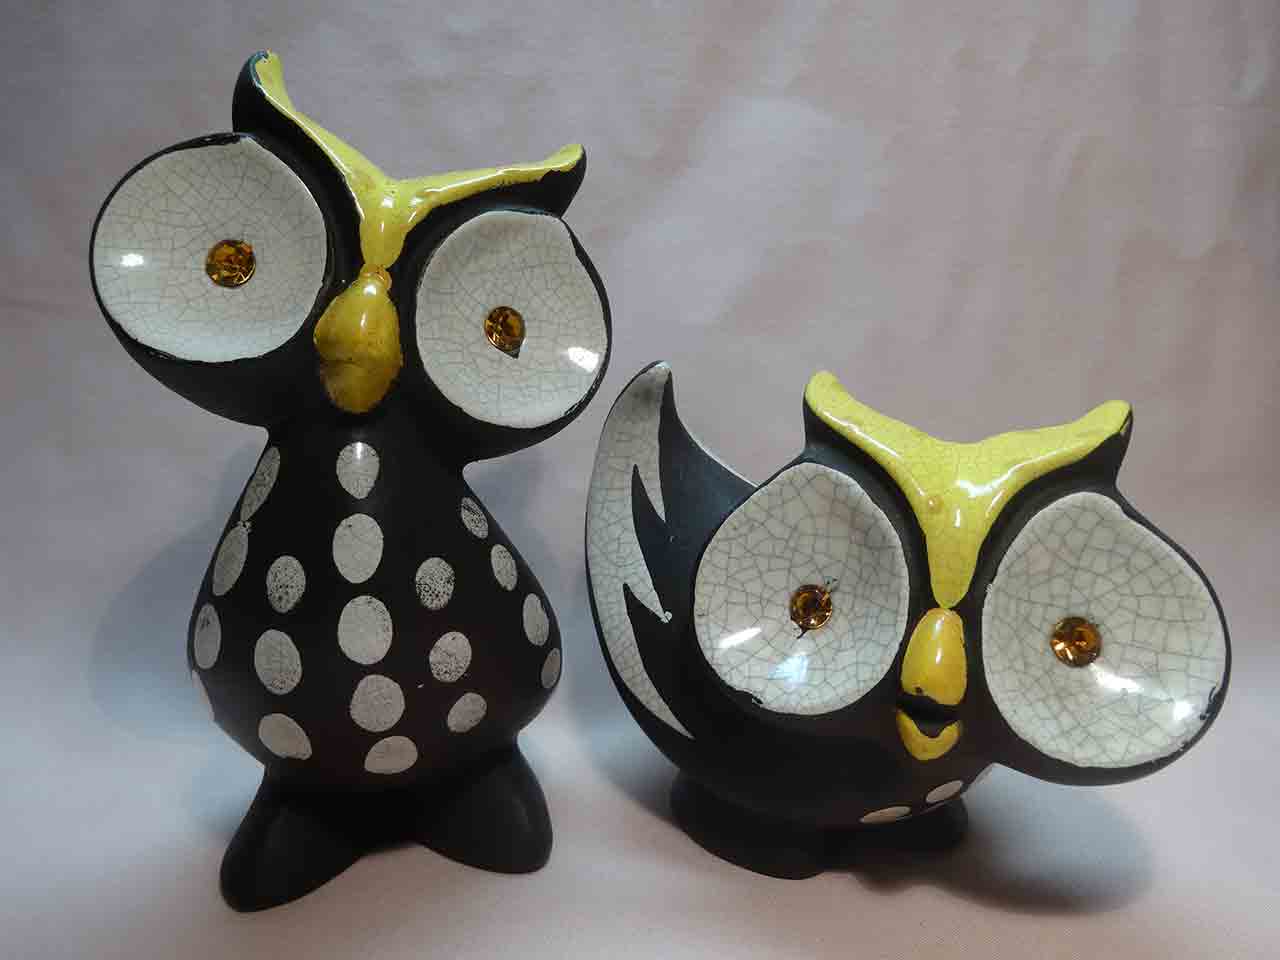 Napco owls salt and pepper shakers